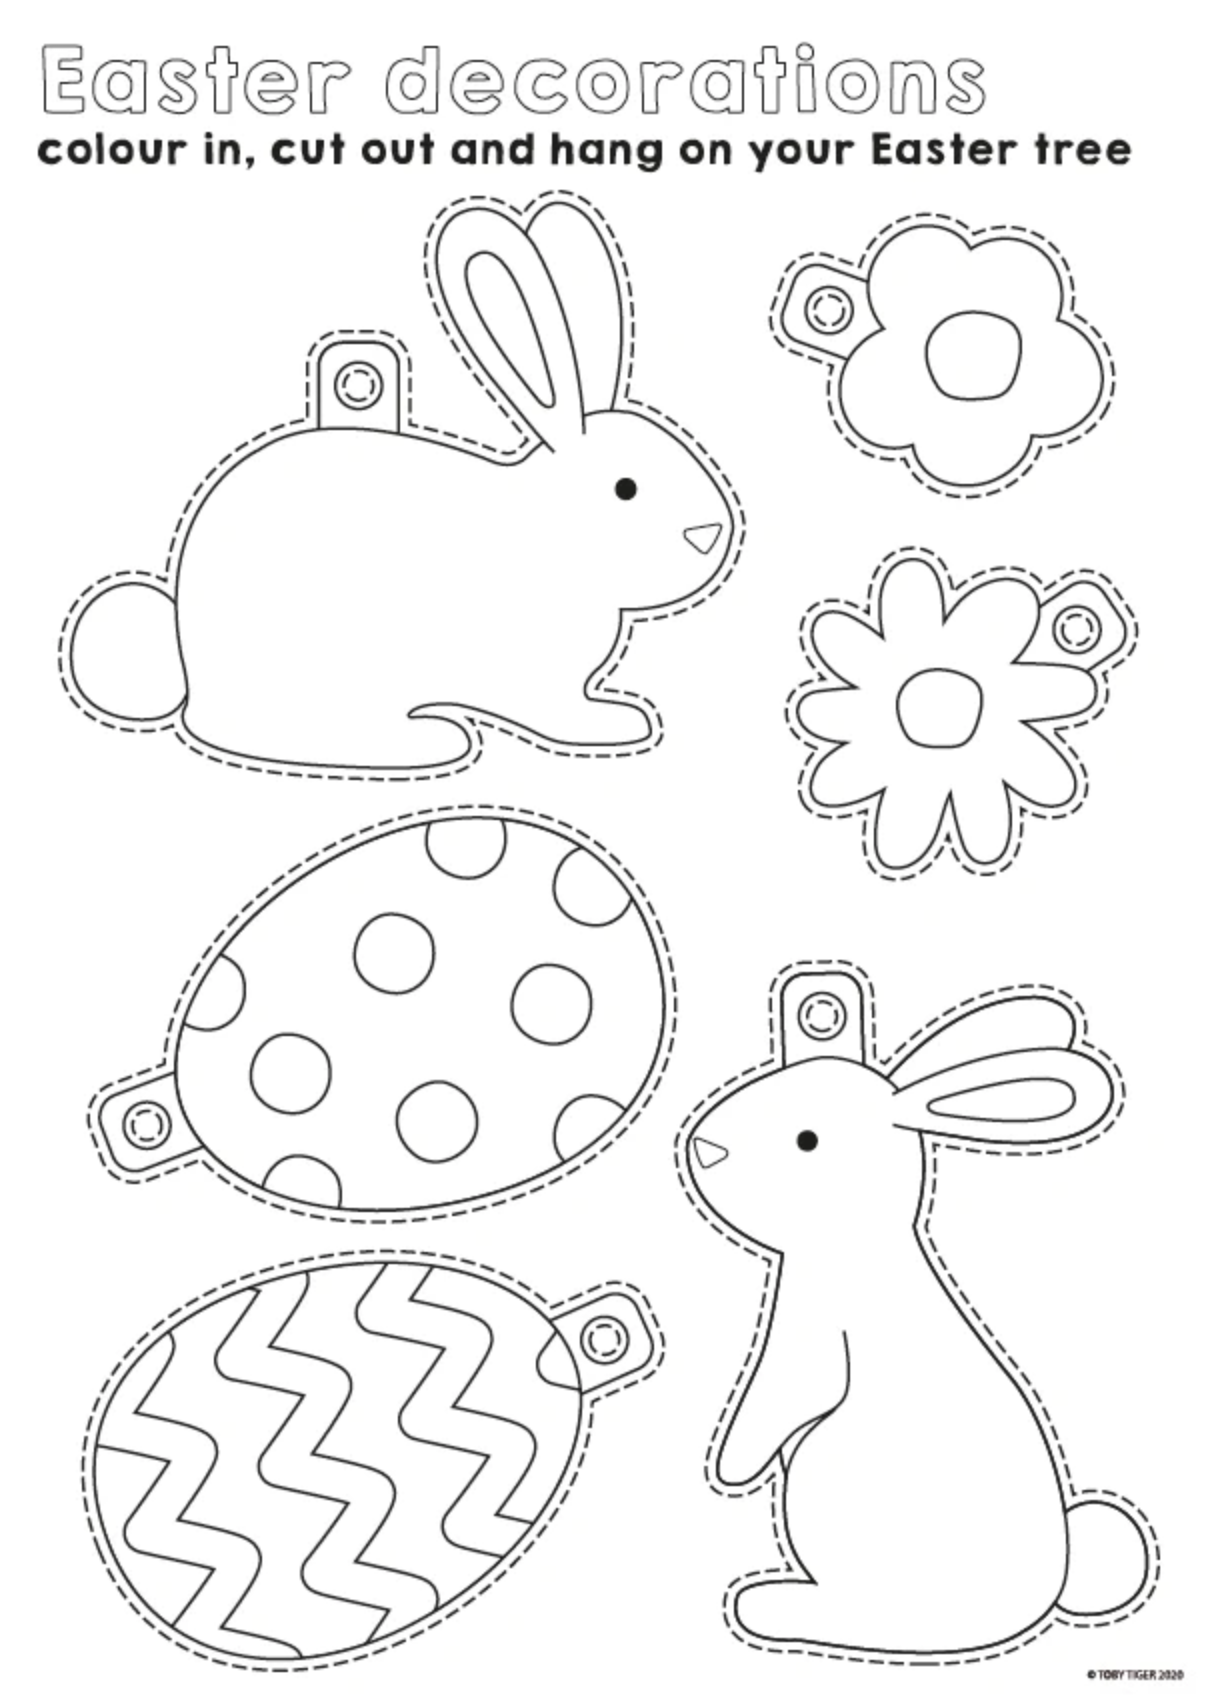 Easter Decorations Template